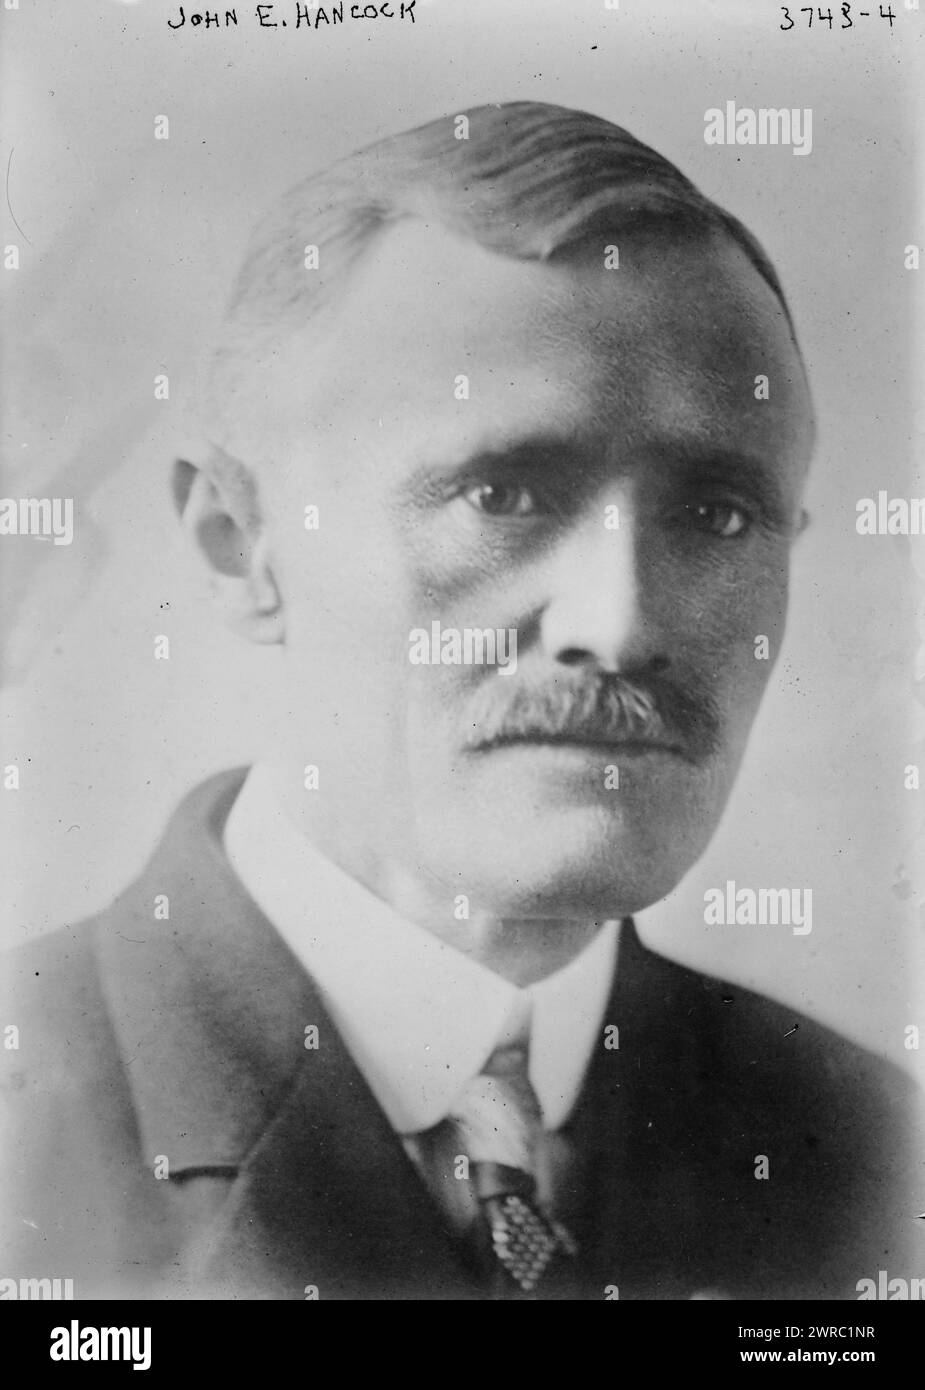 John E. Hancock, Photograph shows John E. Hancock, motorman of the Union Traction Company of Anderson, Indiana, who was awarded the Anthony N. Brady memorial bronze medal by the American Museum of Safety in 1916 for distinguished service during 1915., between ca. 1915 and ca. 1920, Glass negatives, 1 negative: glass Stock Photo